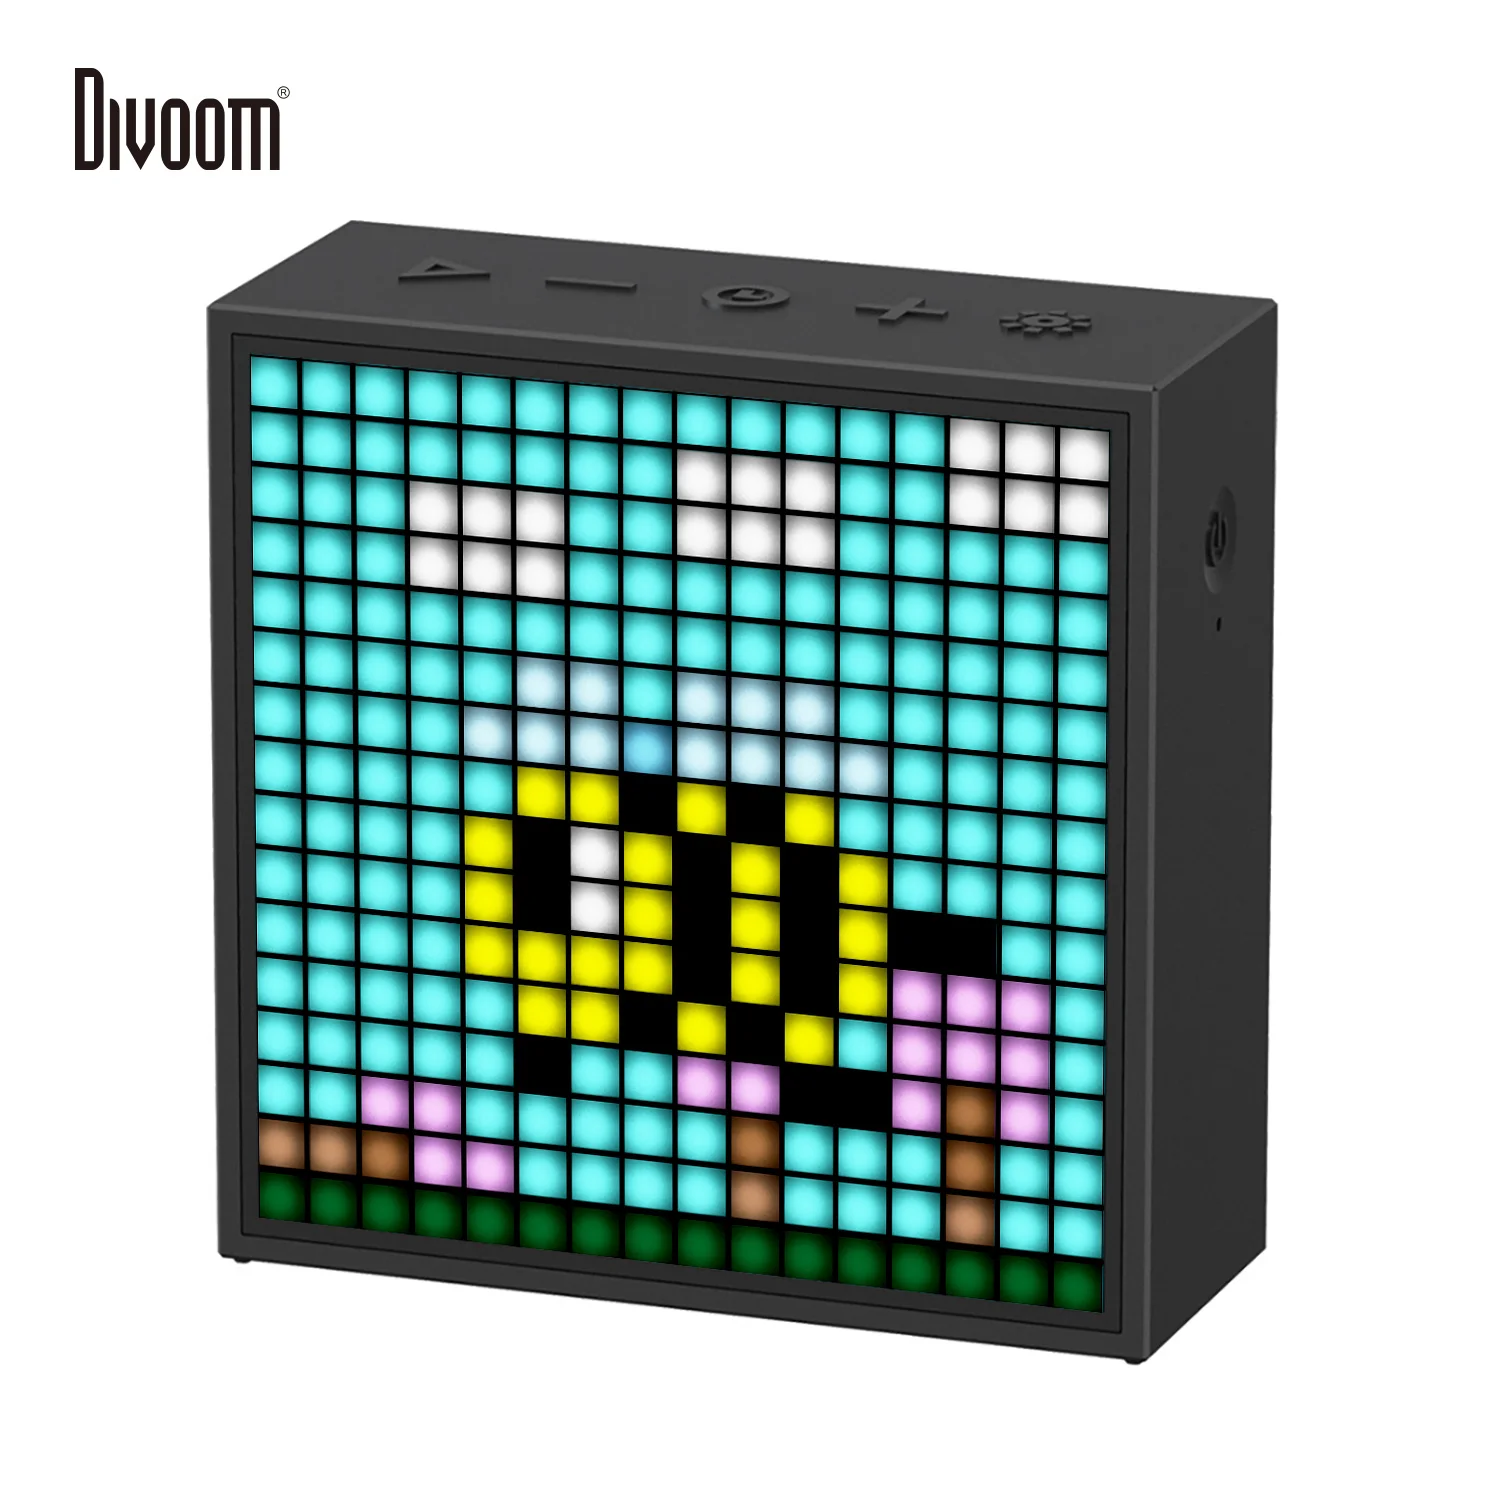 

Divoom Timebox Evo Bluetooth Portable Speaker with Clock Alarm Programmable LED Display for Pixel Art Creation Desk Unique Gift